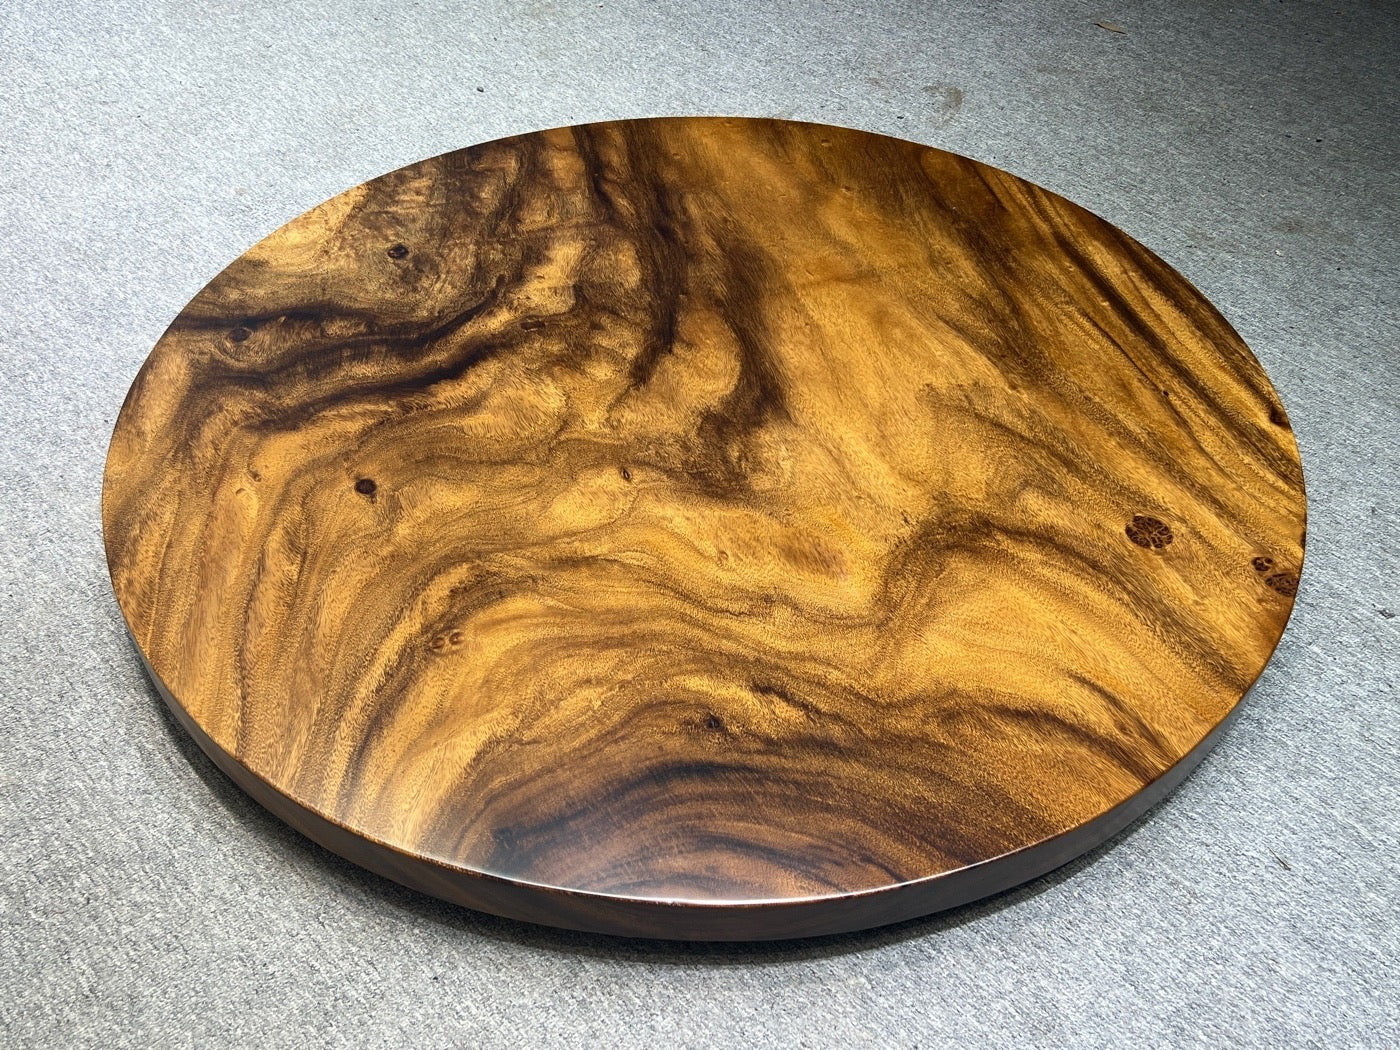 Monkey Pod round dining table wood, round wood side table, coffee table round wood